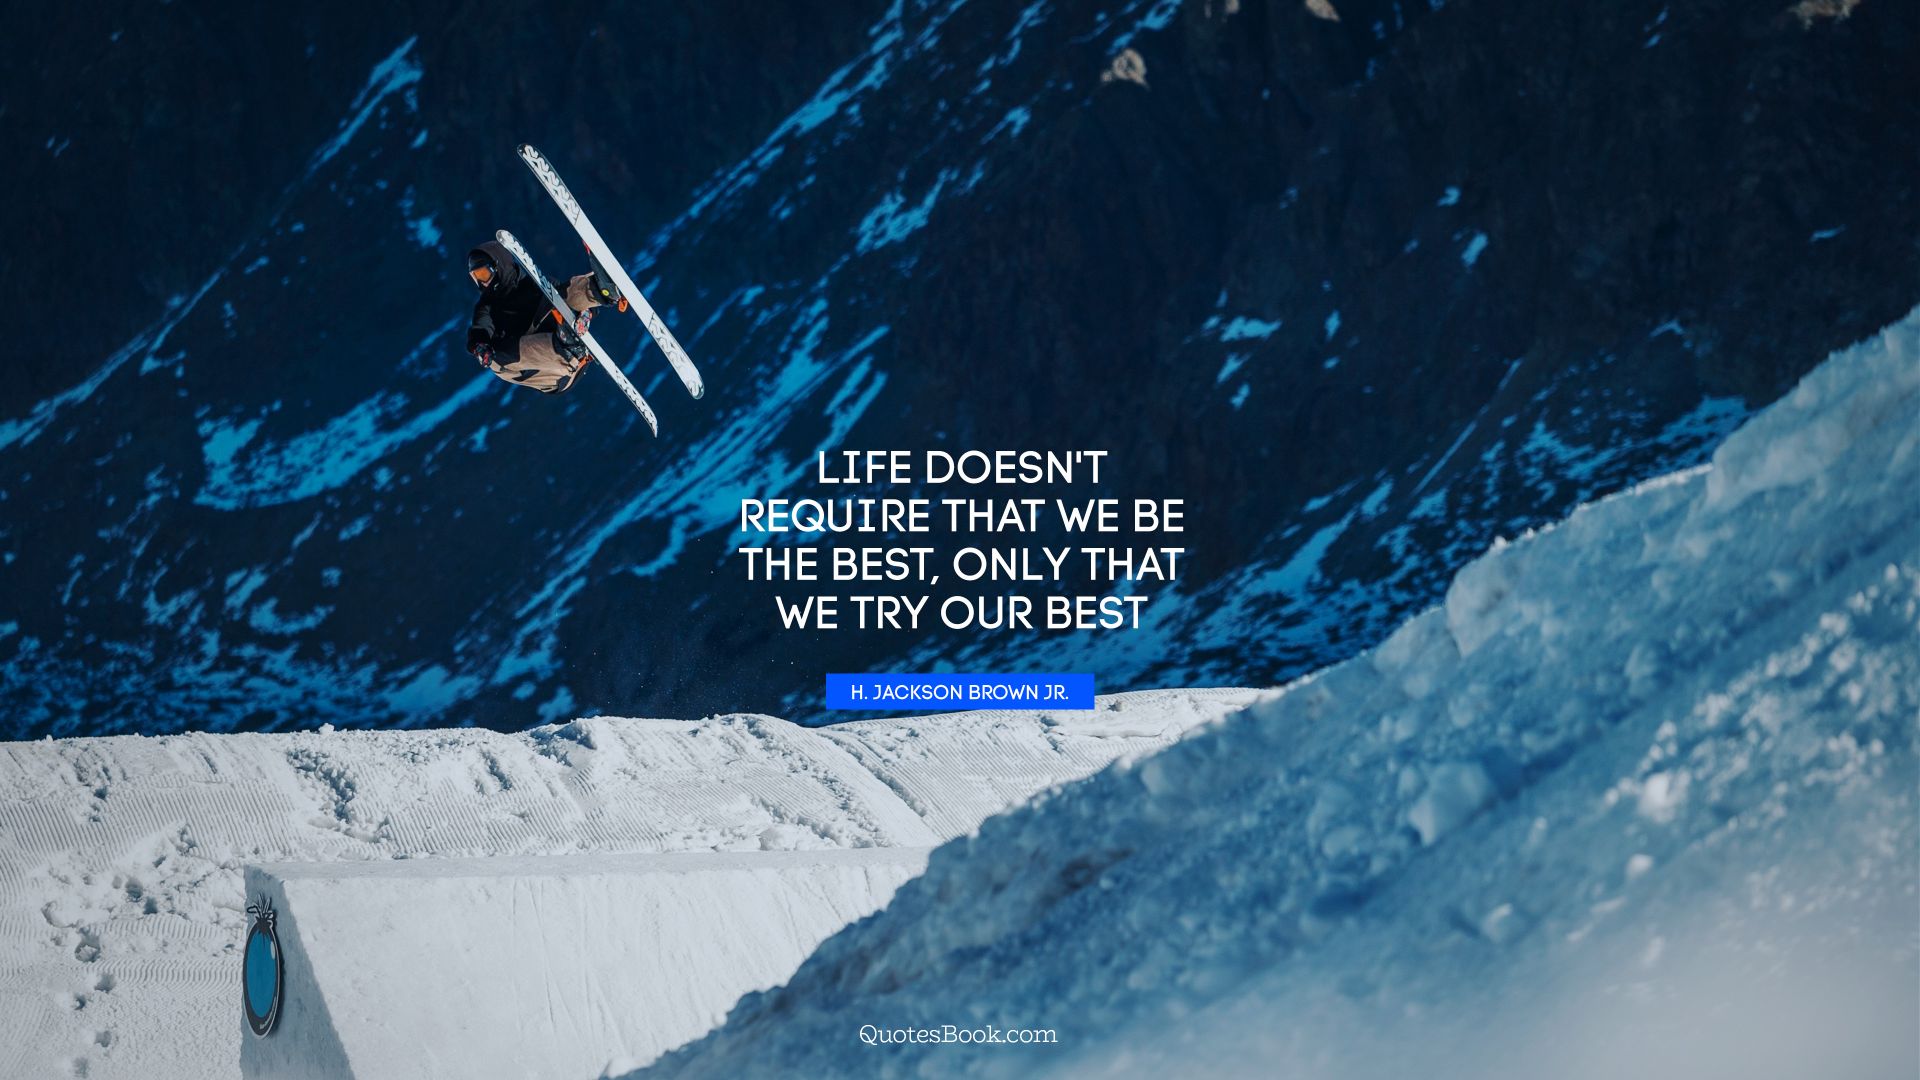 Life doesn't require that we be the best, only that we try our best. - Quote by H. Jackson Brown, Jr.